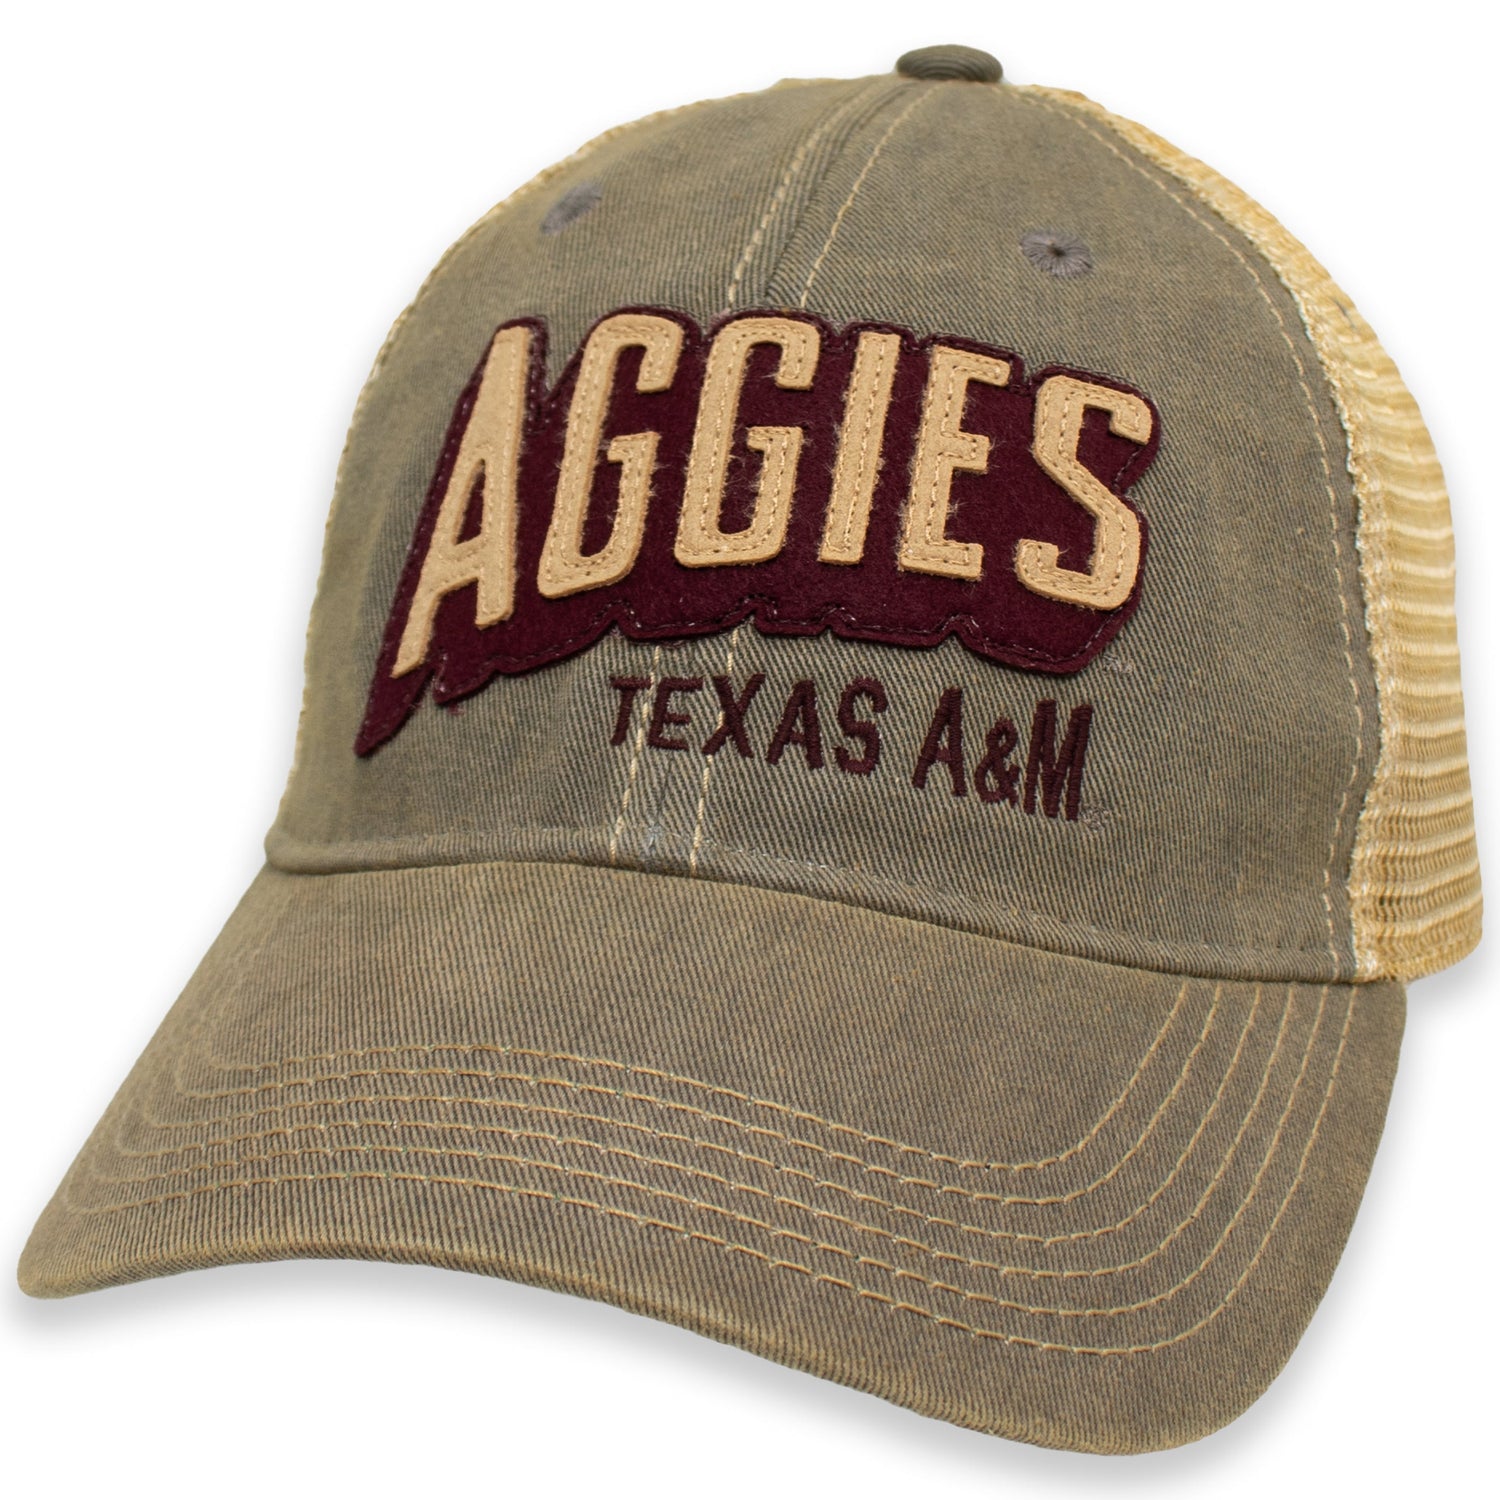 Texas A&M Aggies Old Favorite Trucker Hat